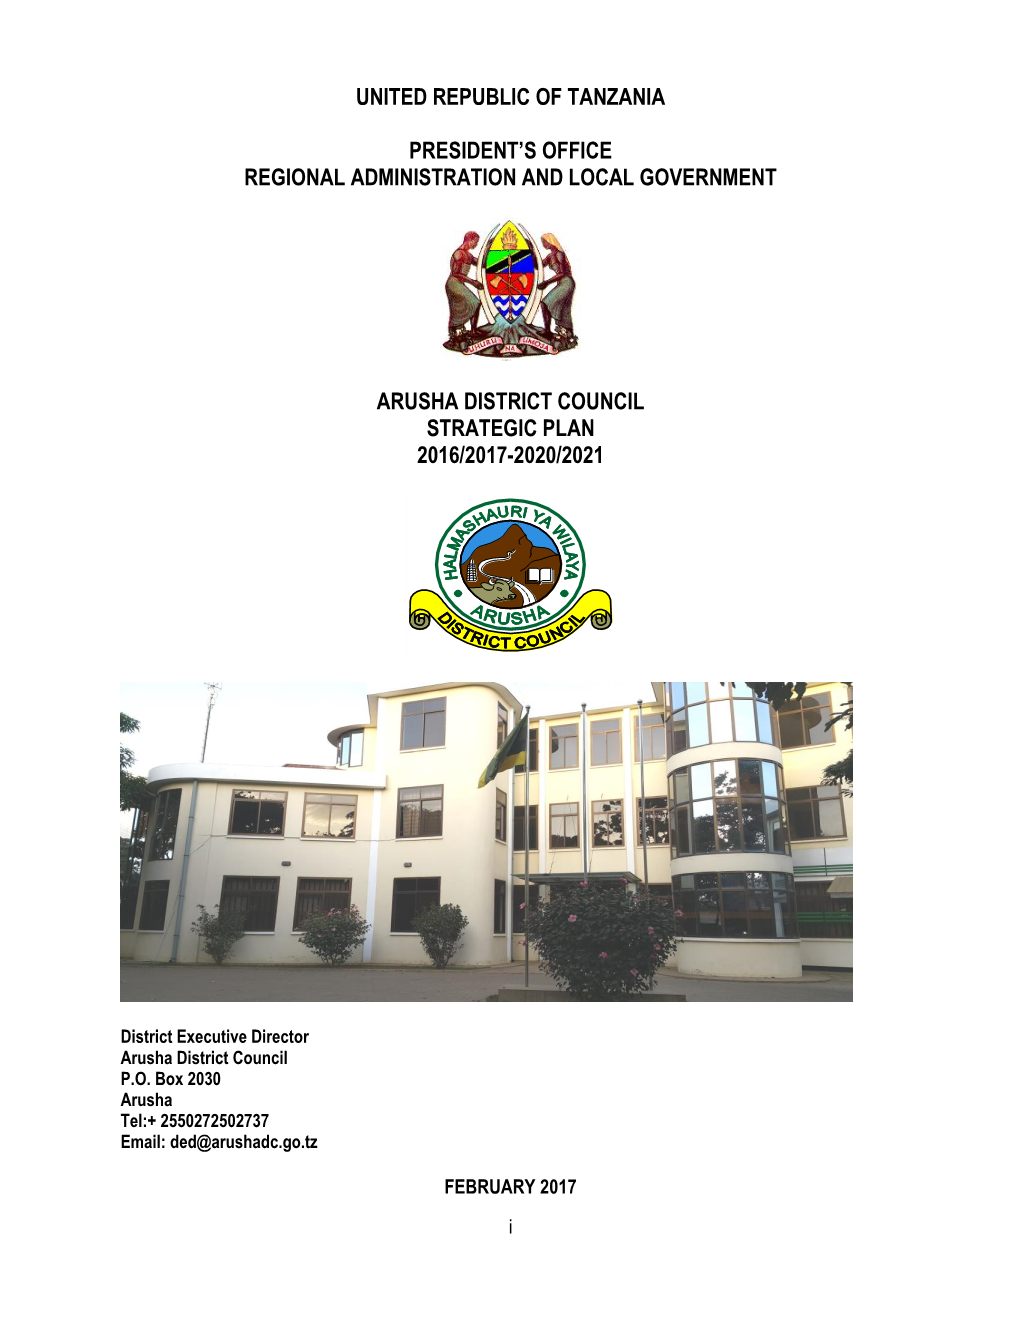 United Republic of Tanzania President's Office Regional Administration and Local Government Arusha District Council Strategic